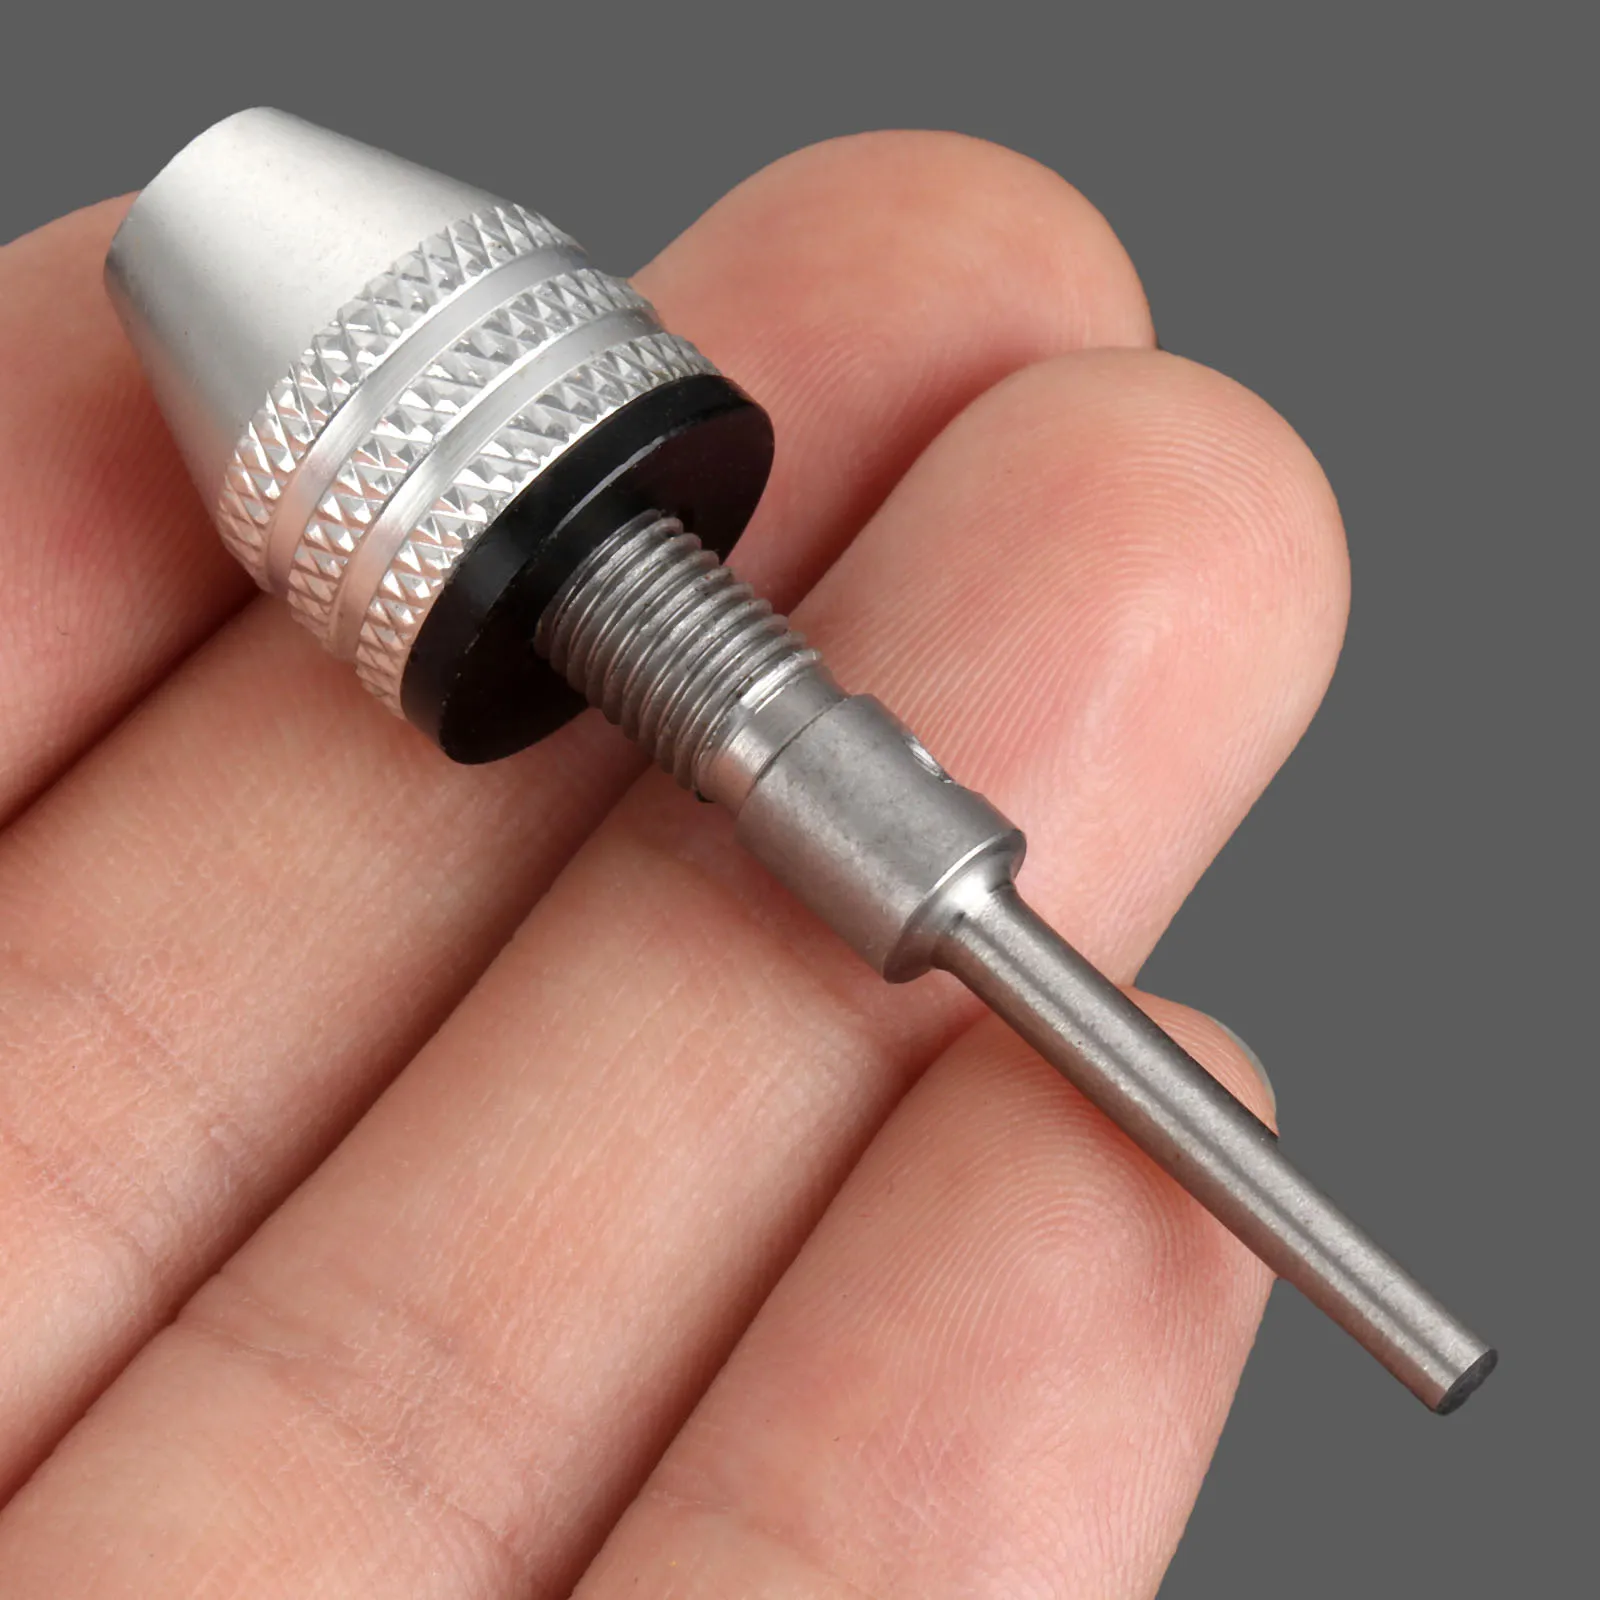 3mm Shank Mini Drill Chuck Adapter Converter For Power Impact Driver Grinding Engraving Machine Conversion Drill Chuck 0.3-3.4mm 18v 650w brushless impact scissors machine handheld electric punching scissors 600n m iron cutting tool for makita 18v battery